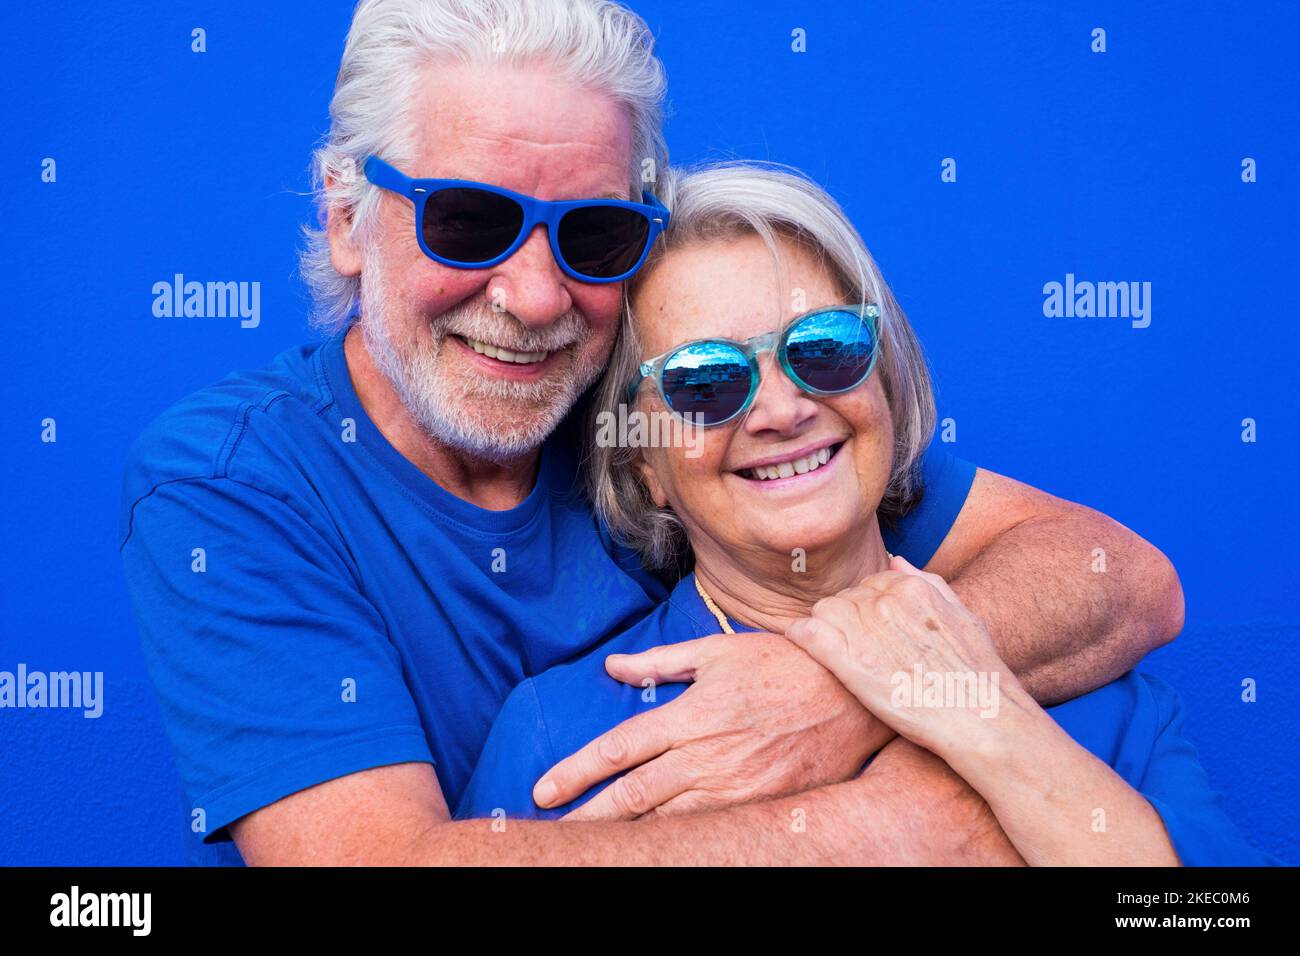 portrait of couple of mature people or seniors together having fun smiling and looking at the camera - woman and man pensioners wearing blue shirt and sunglasses with blue background - trendy colorful and happy people Stock Photo